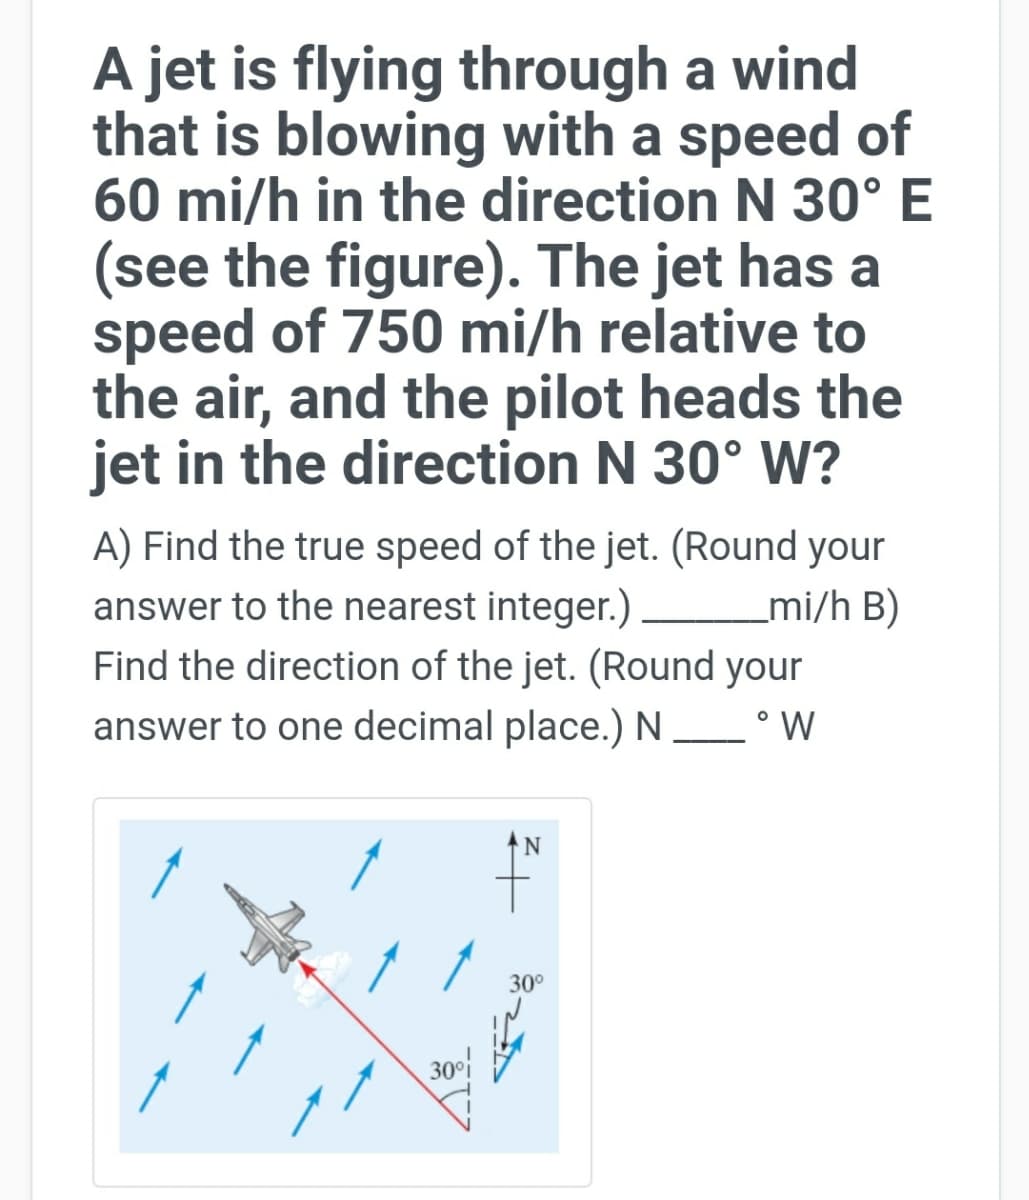 A jet is flying through a wind
that is blowing with a speed of
60 mi/h in the direction N 30°E
(see the figure). The jet has a
speed of 750 mi/h relative to
the air, and the pilot heads the
jet in the direction N 30° W?
A) Find the true speed of the jet. (Round your
answer to the nearest integer.) –
Find the direction of the jet. (Round your
answer to one decimal place.) N_° W
_mi/h B)
30°
30f
